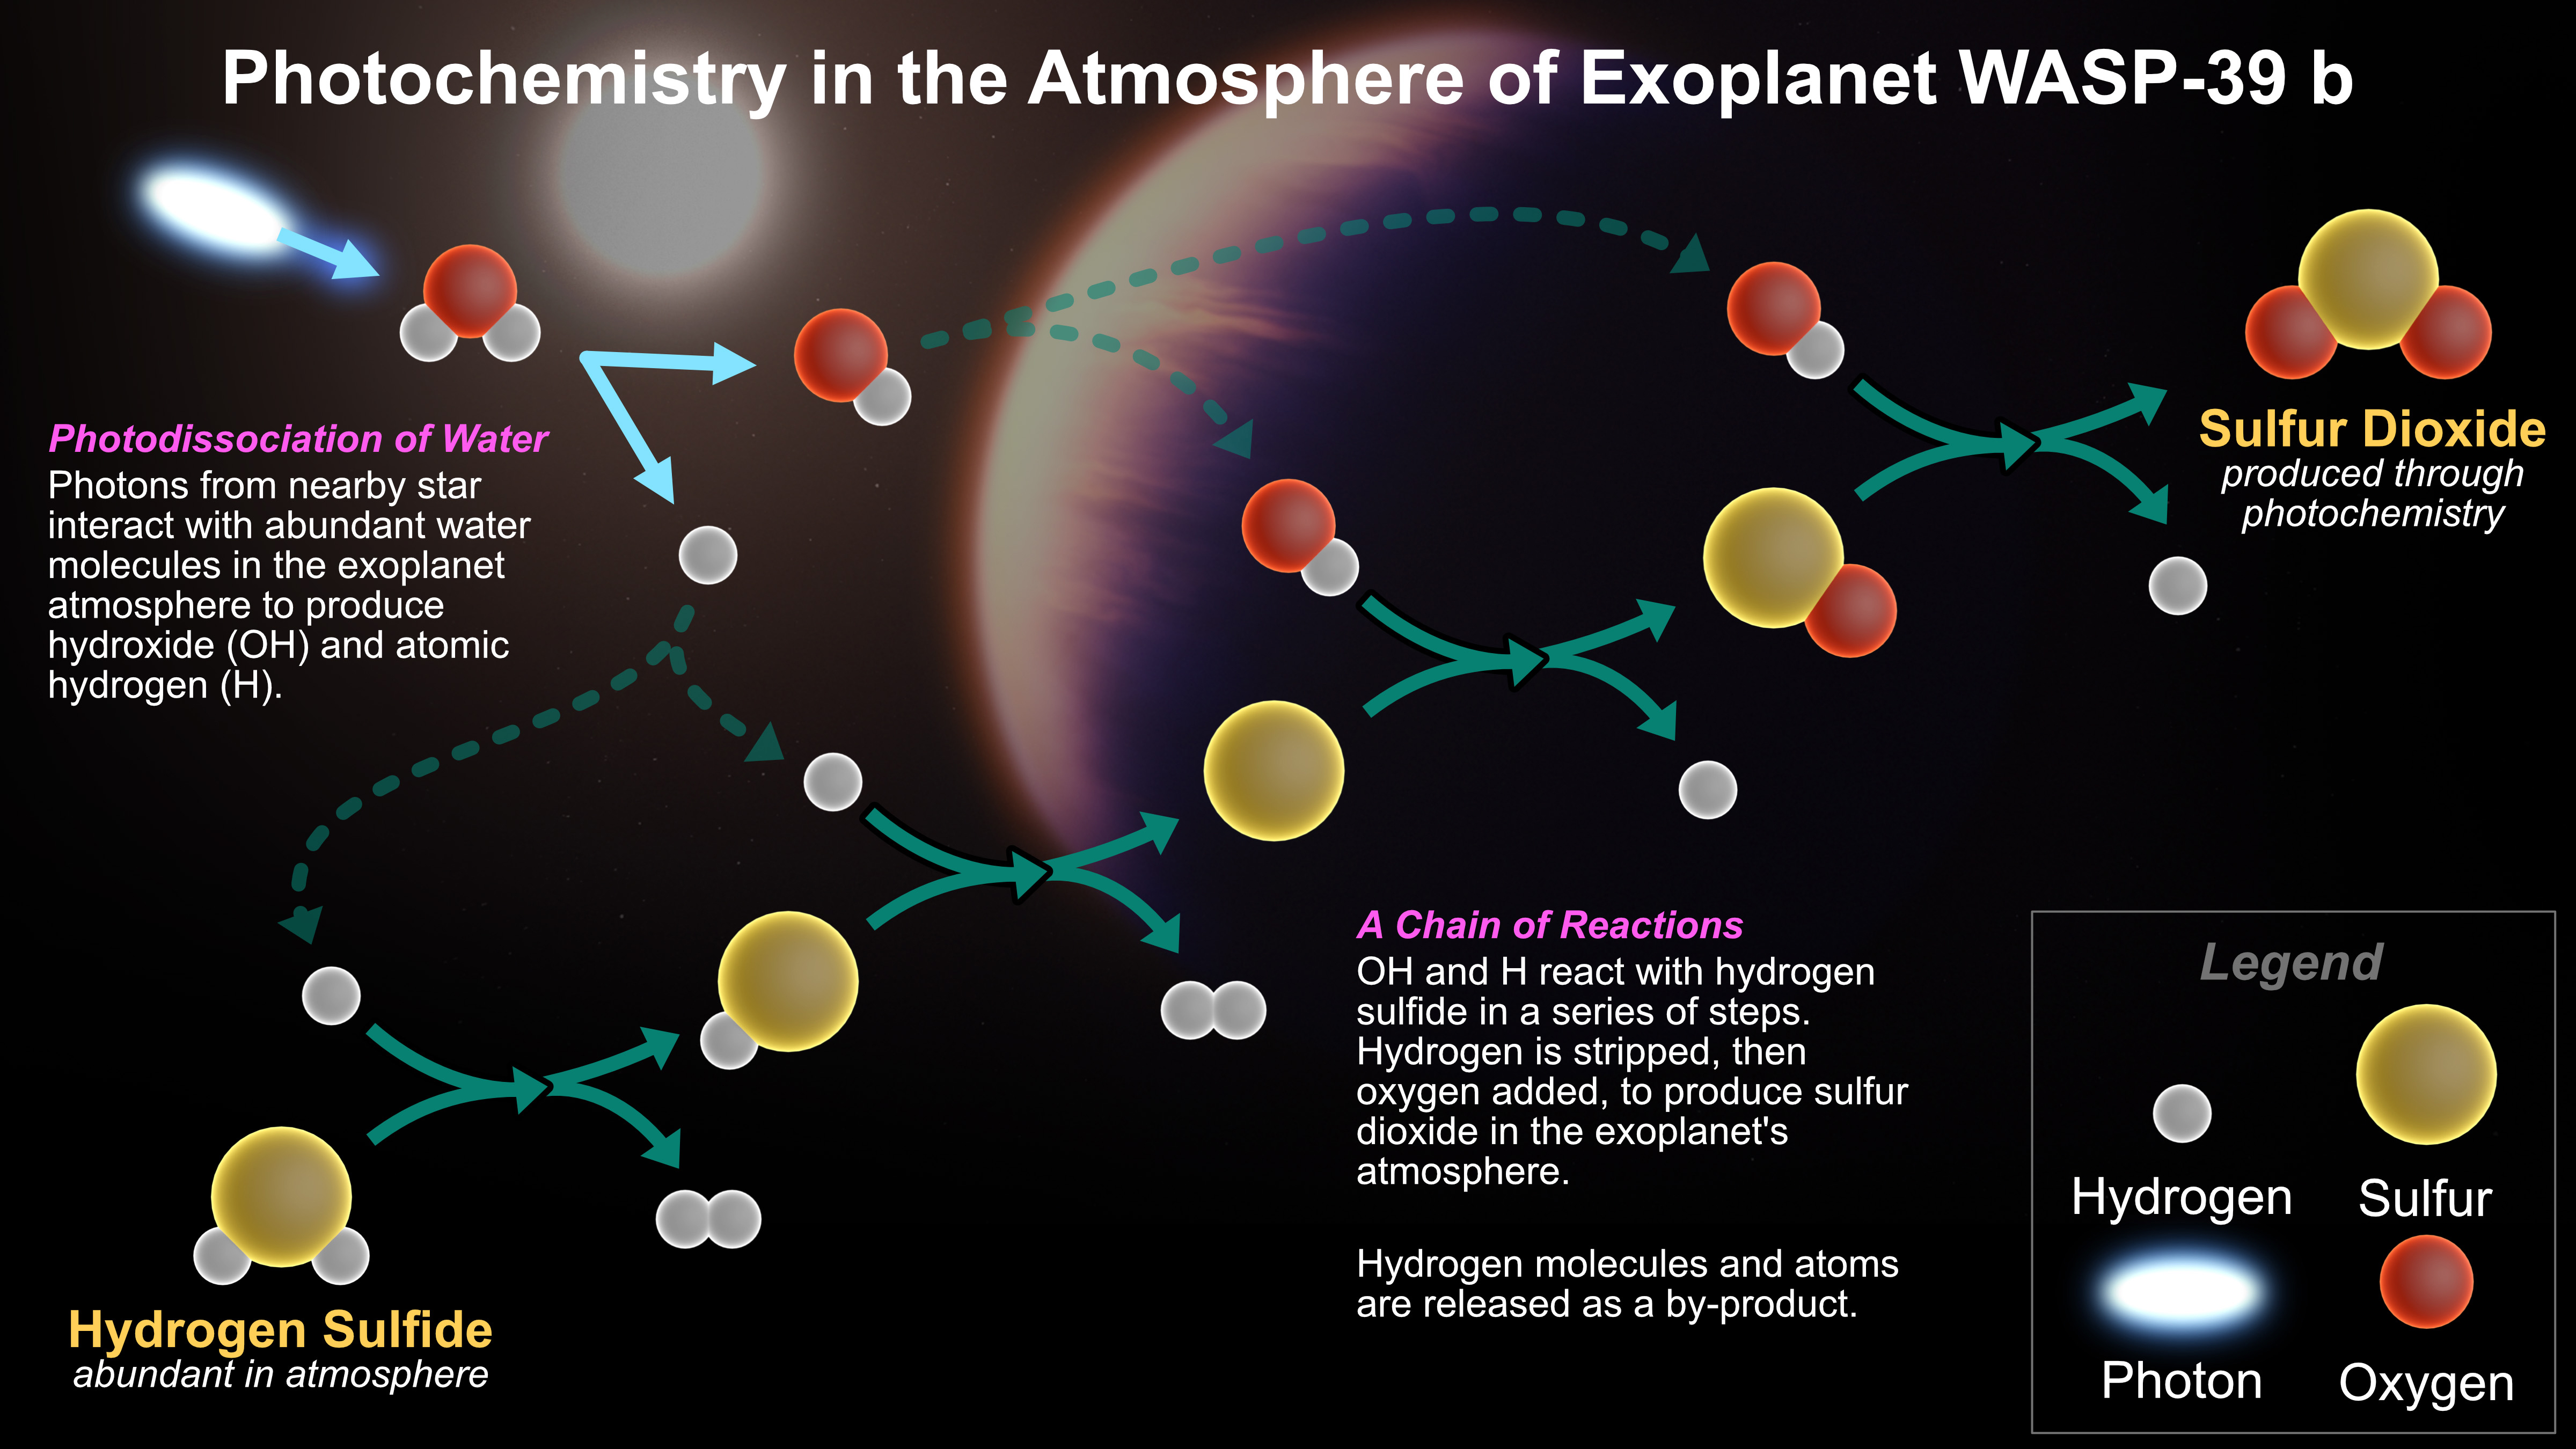 NASA’s James Webb Space Telescope made the first identification of sulfur dioxide in an exoplanet’s atmosphere